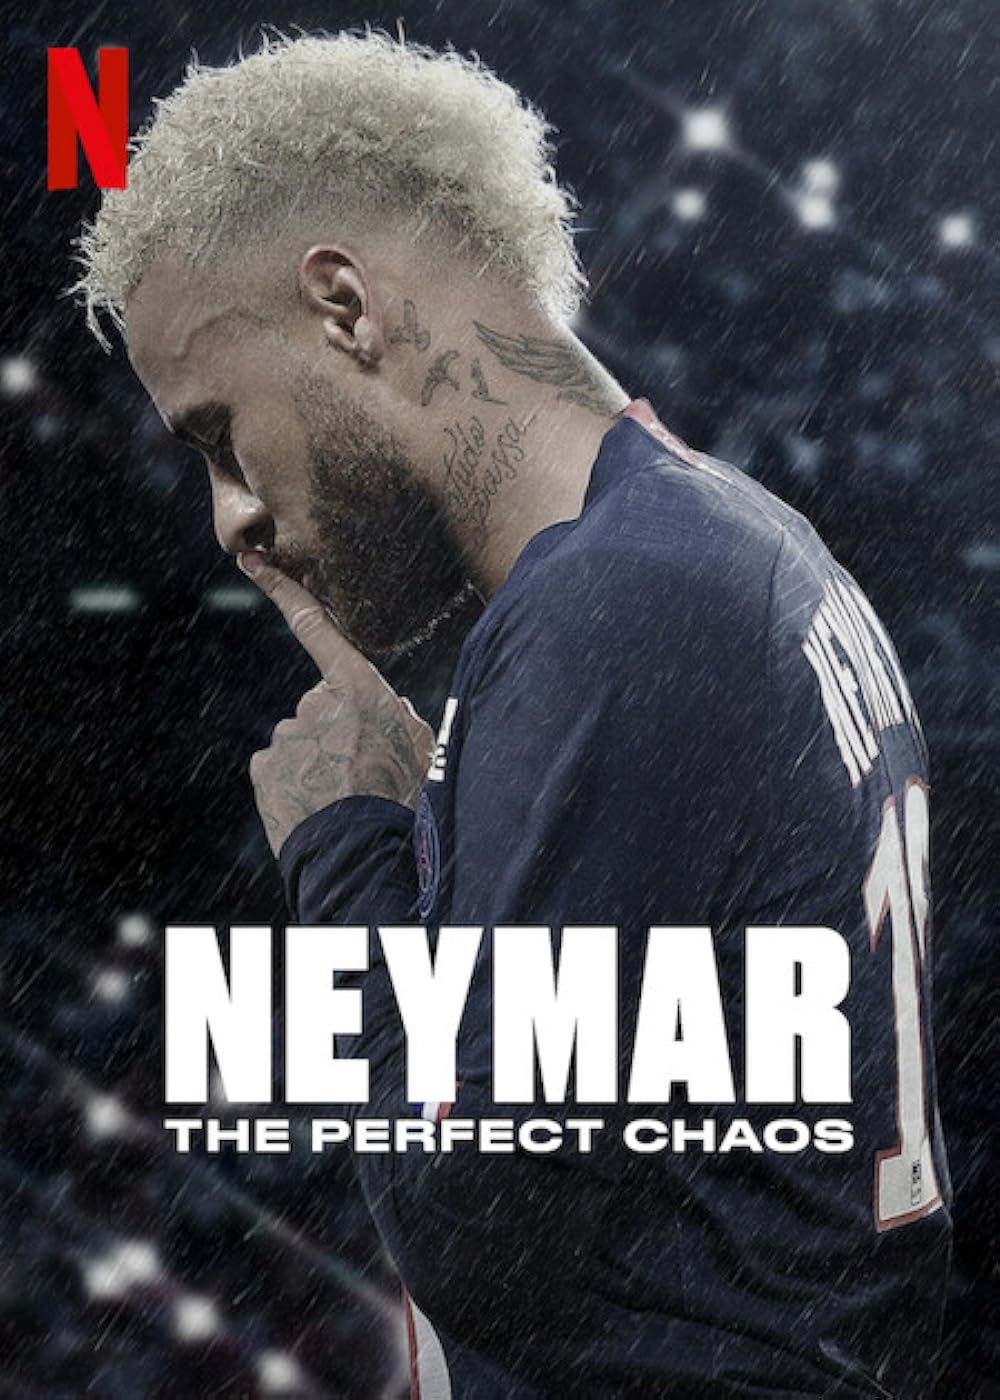 Neymar: The Perfect Chaos (2022) The Great Brazilian Promise S1 EP1 640Kbps 23.976Fps 48Khz 5.1Ch DD+ NF E-AC3 Turkish Audio TAC